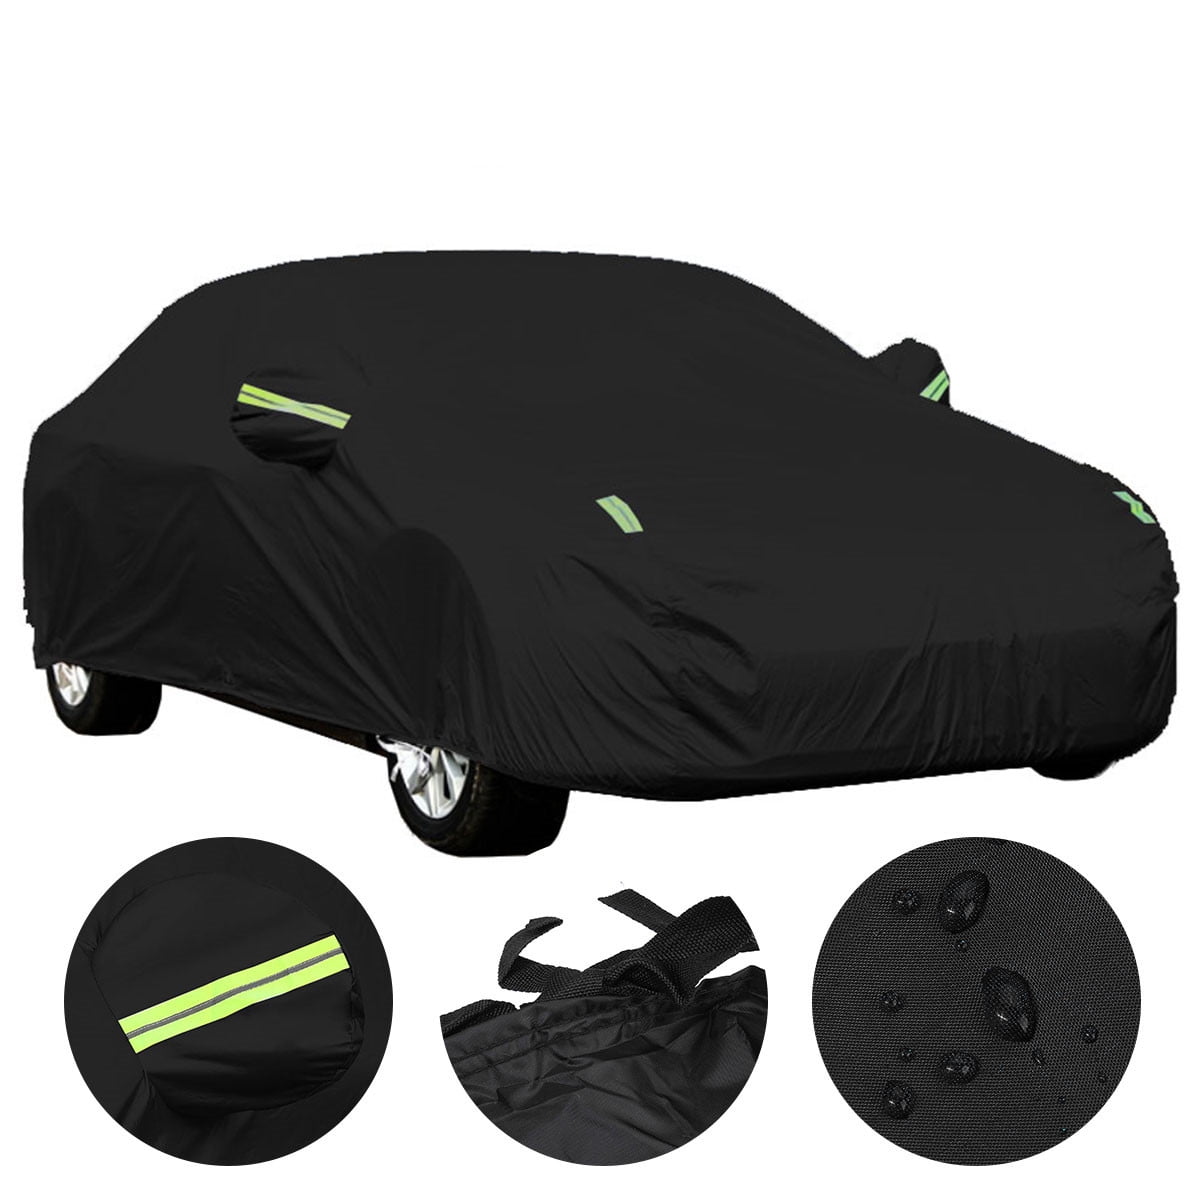 SEDAN 425-470cm 3 Layer Waterproof UV Breathable Car STRONG COVER PROTECTOR 